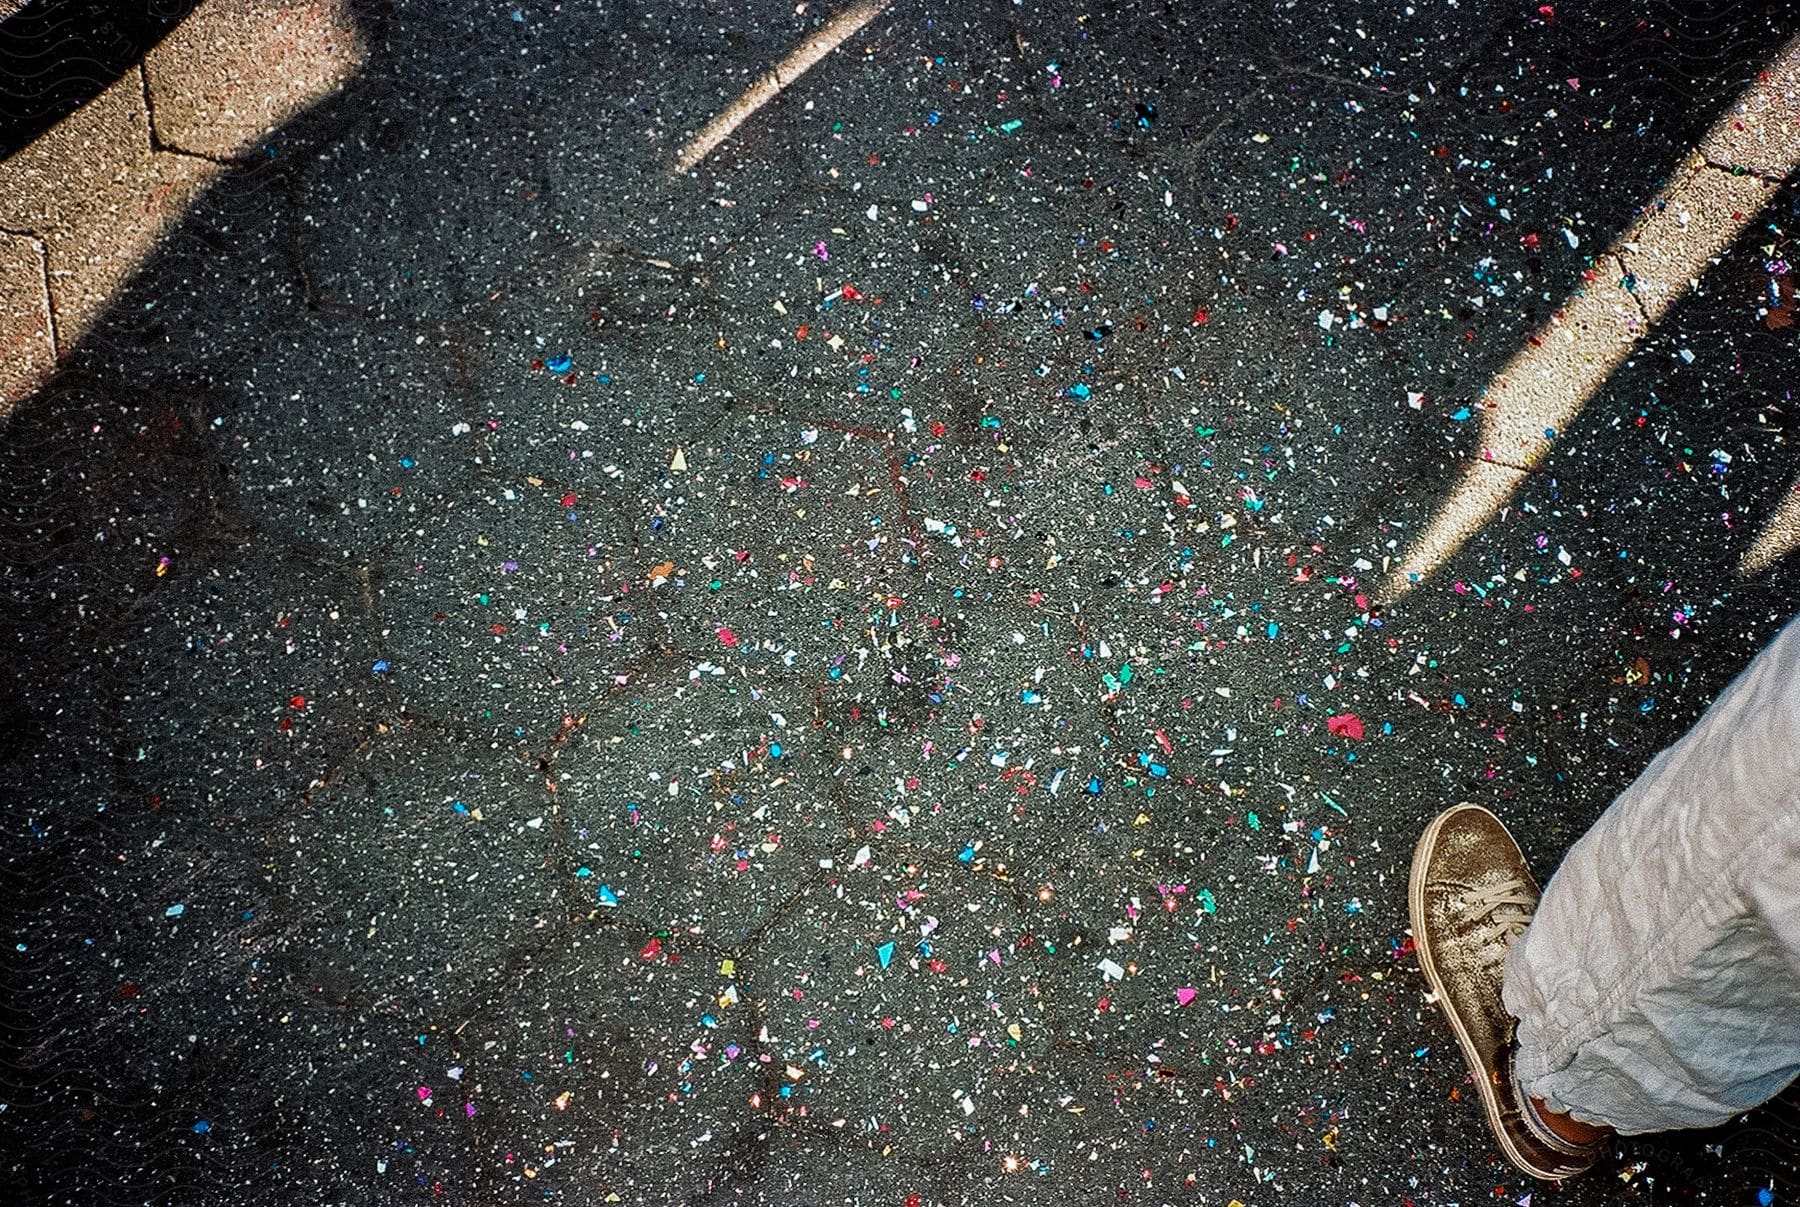 Brightly colored flecks on asphalt a persons leg at the edge of the photo